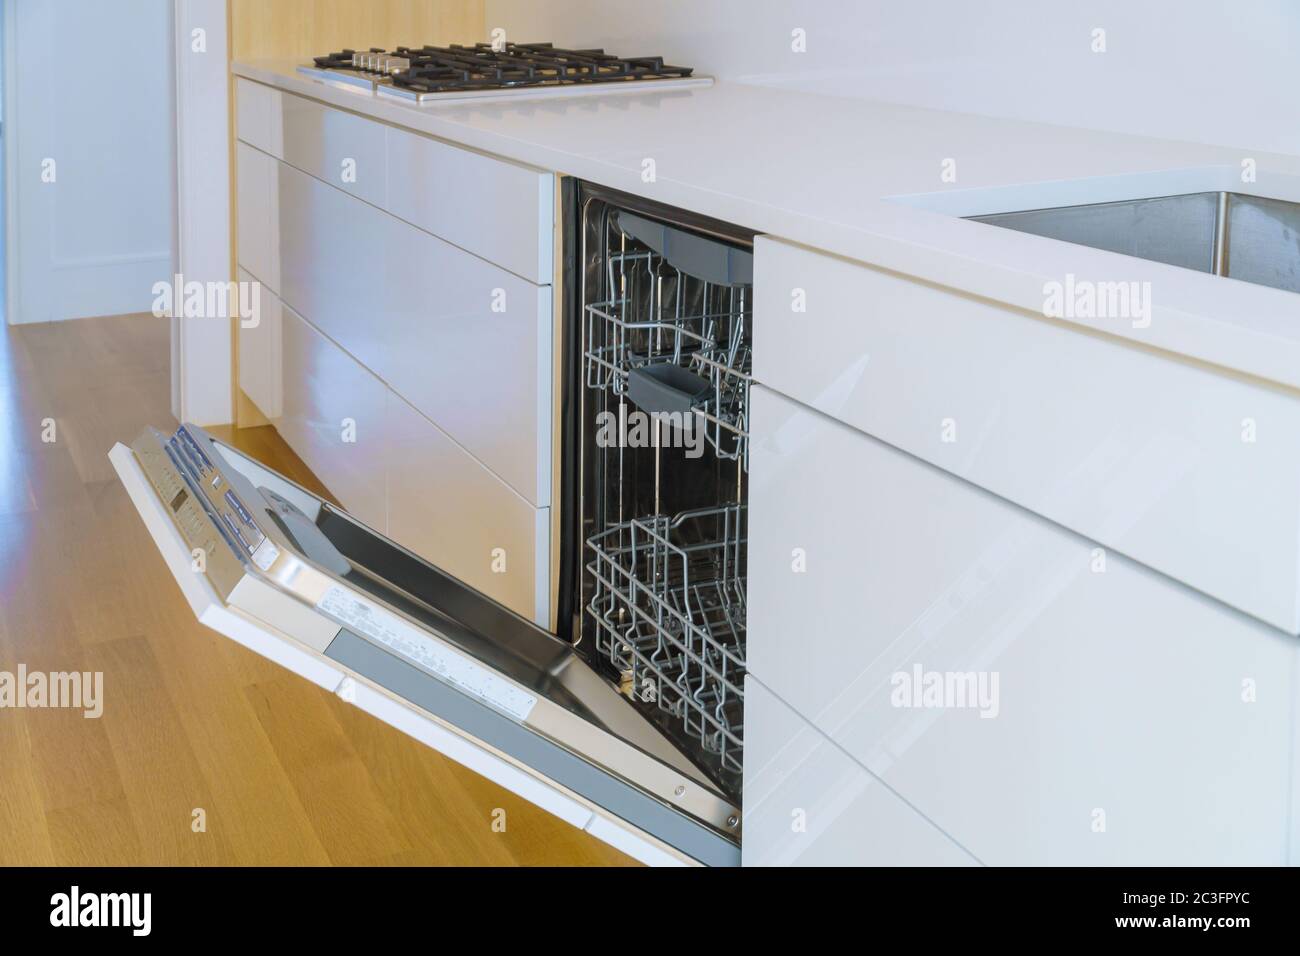 Modern domestic kitchen cabinets with new appliances dishwasher in kitchen Stock Photo